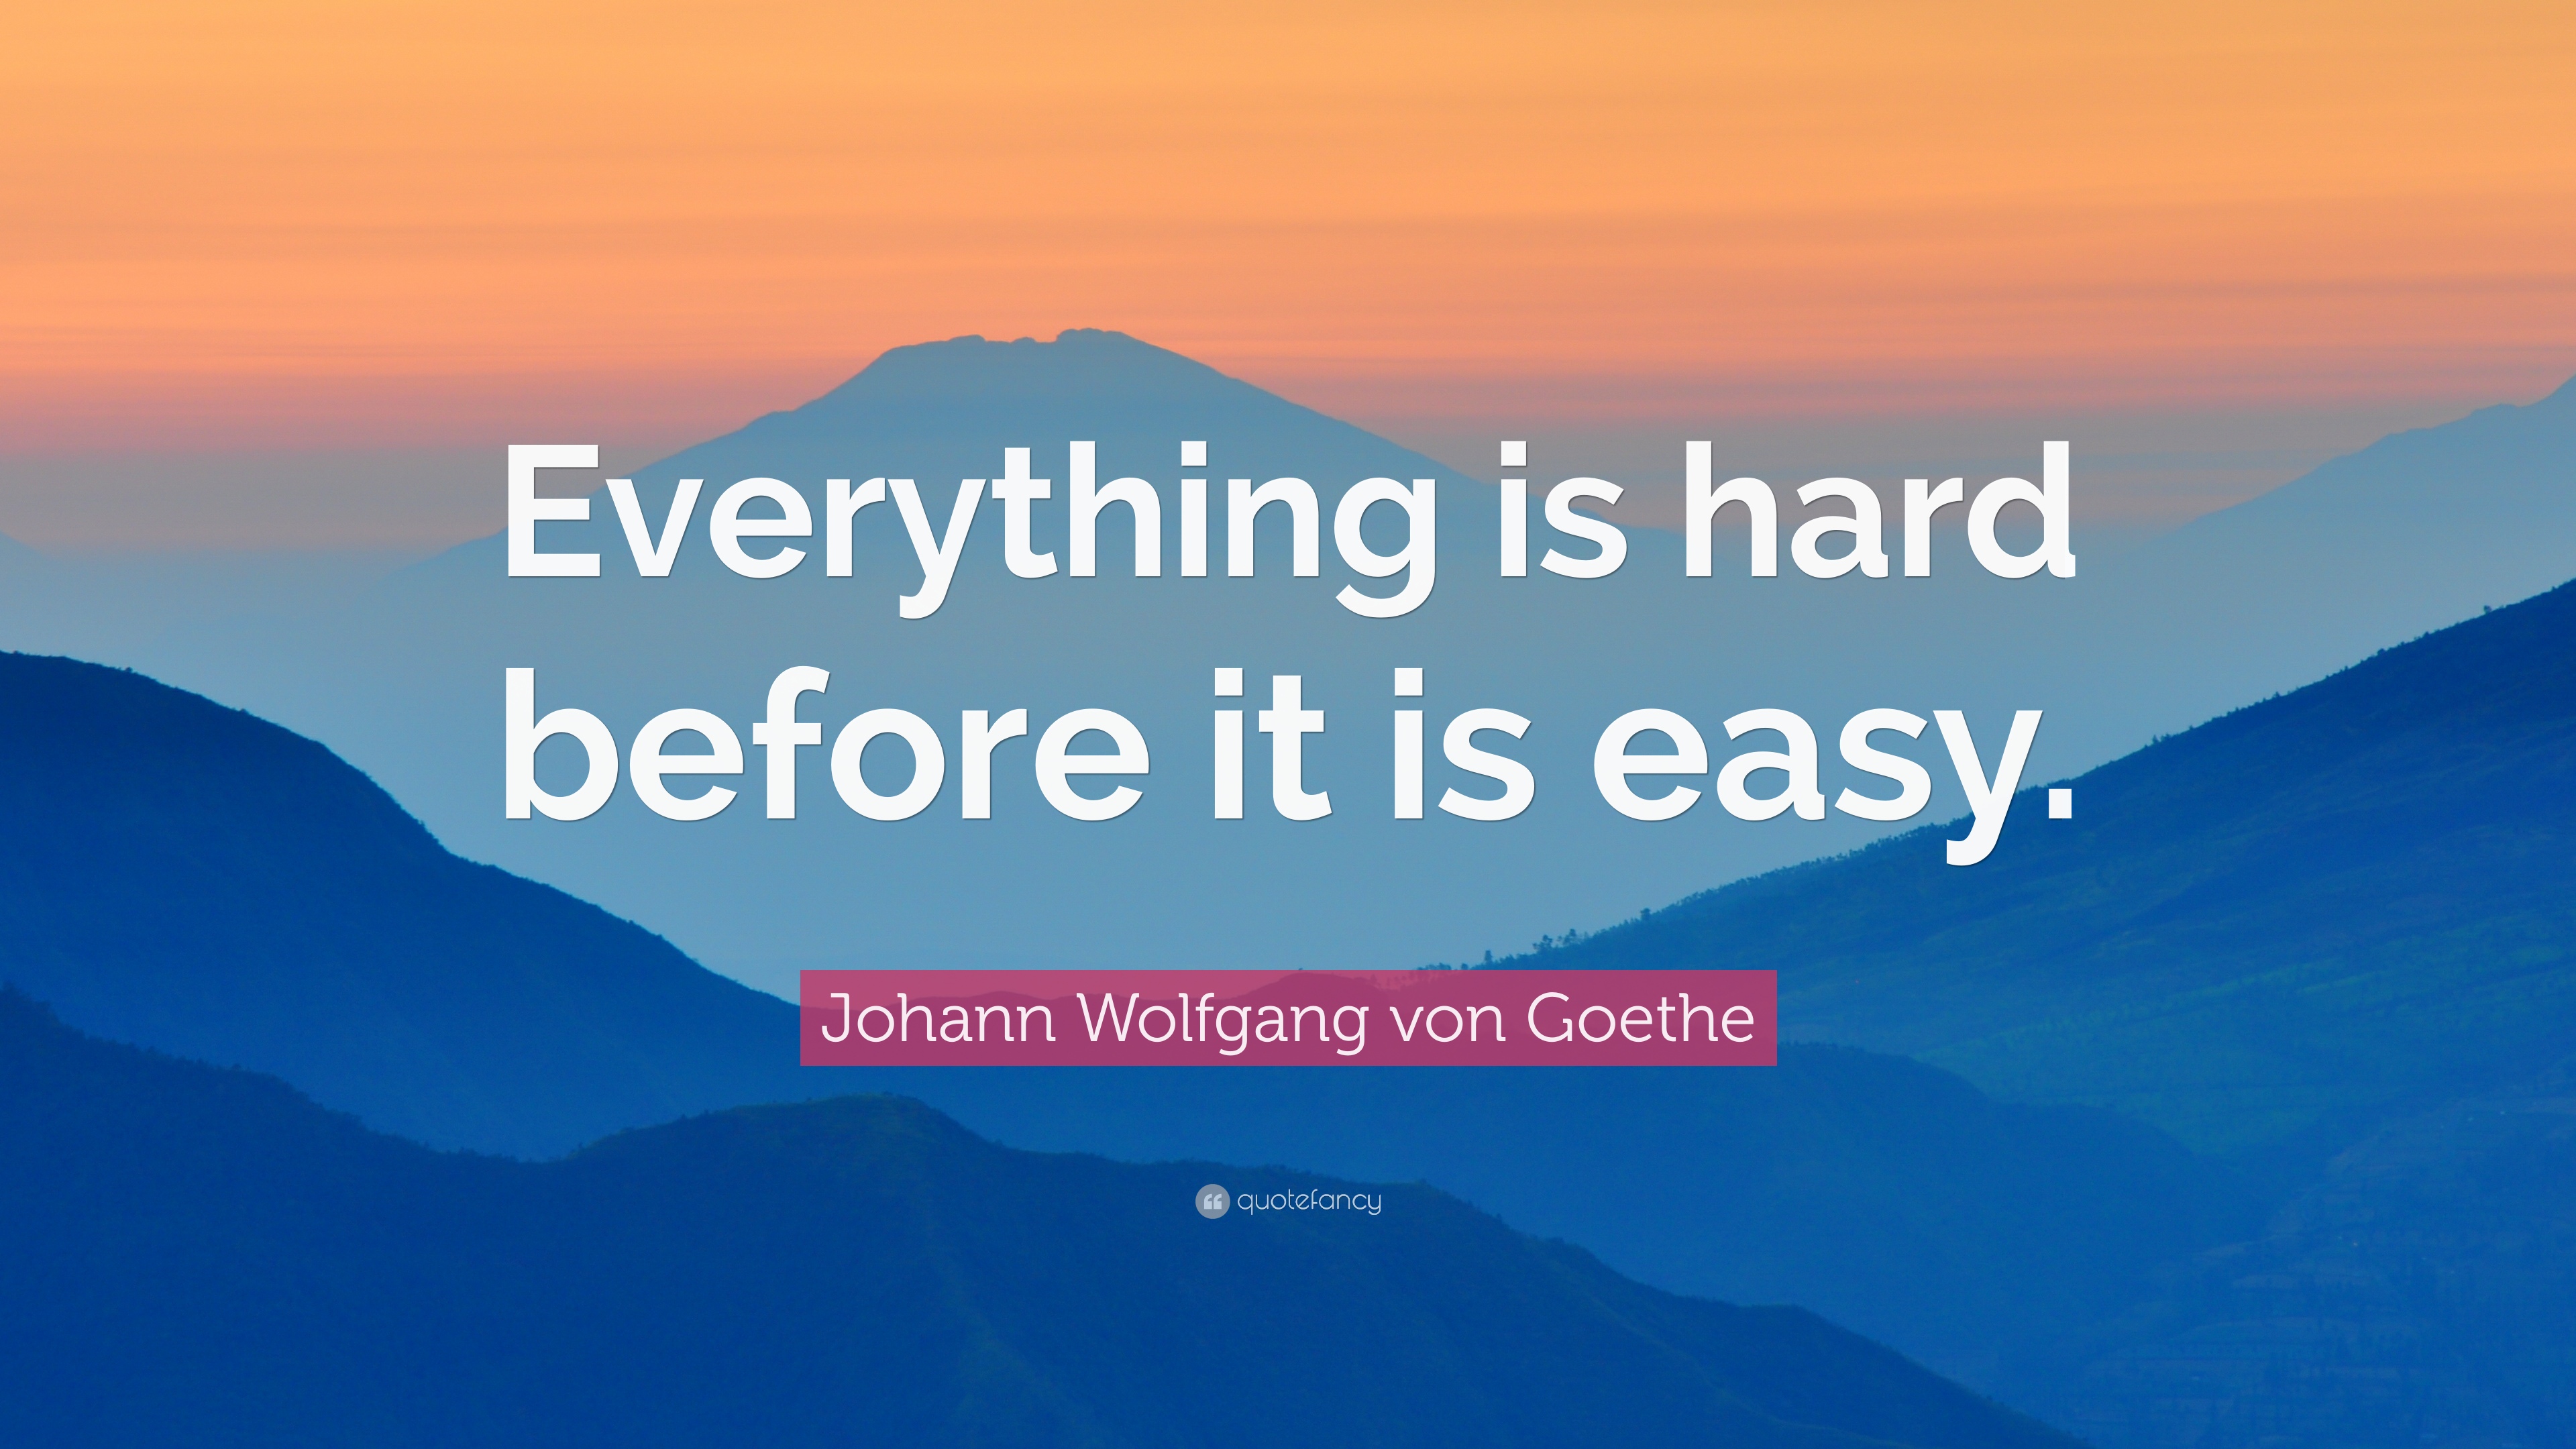 Johann Wolfgang von Goethe Quote: “Everything is hard before it is